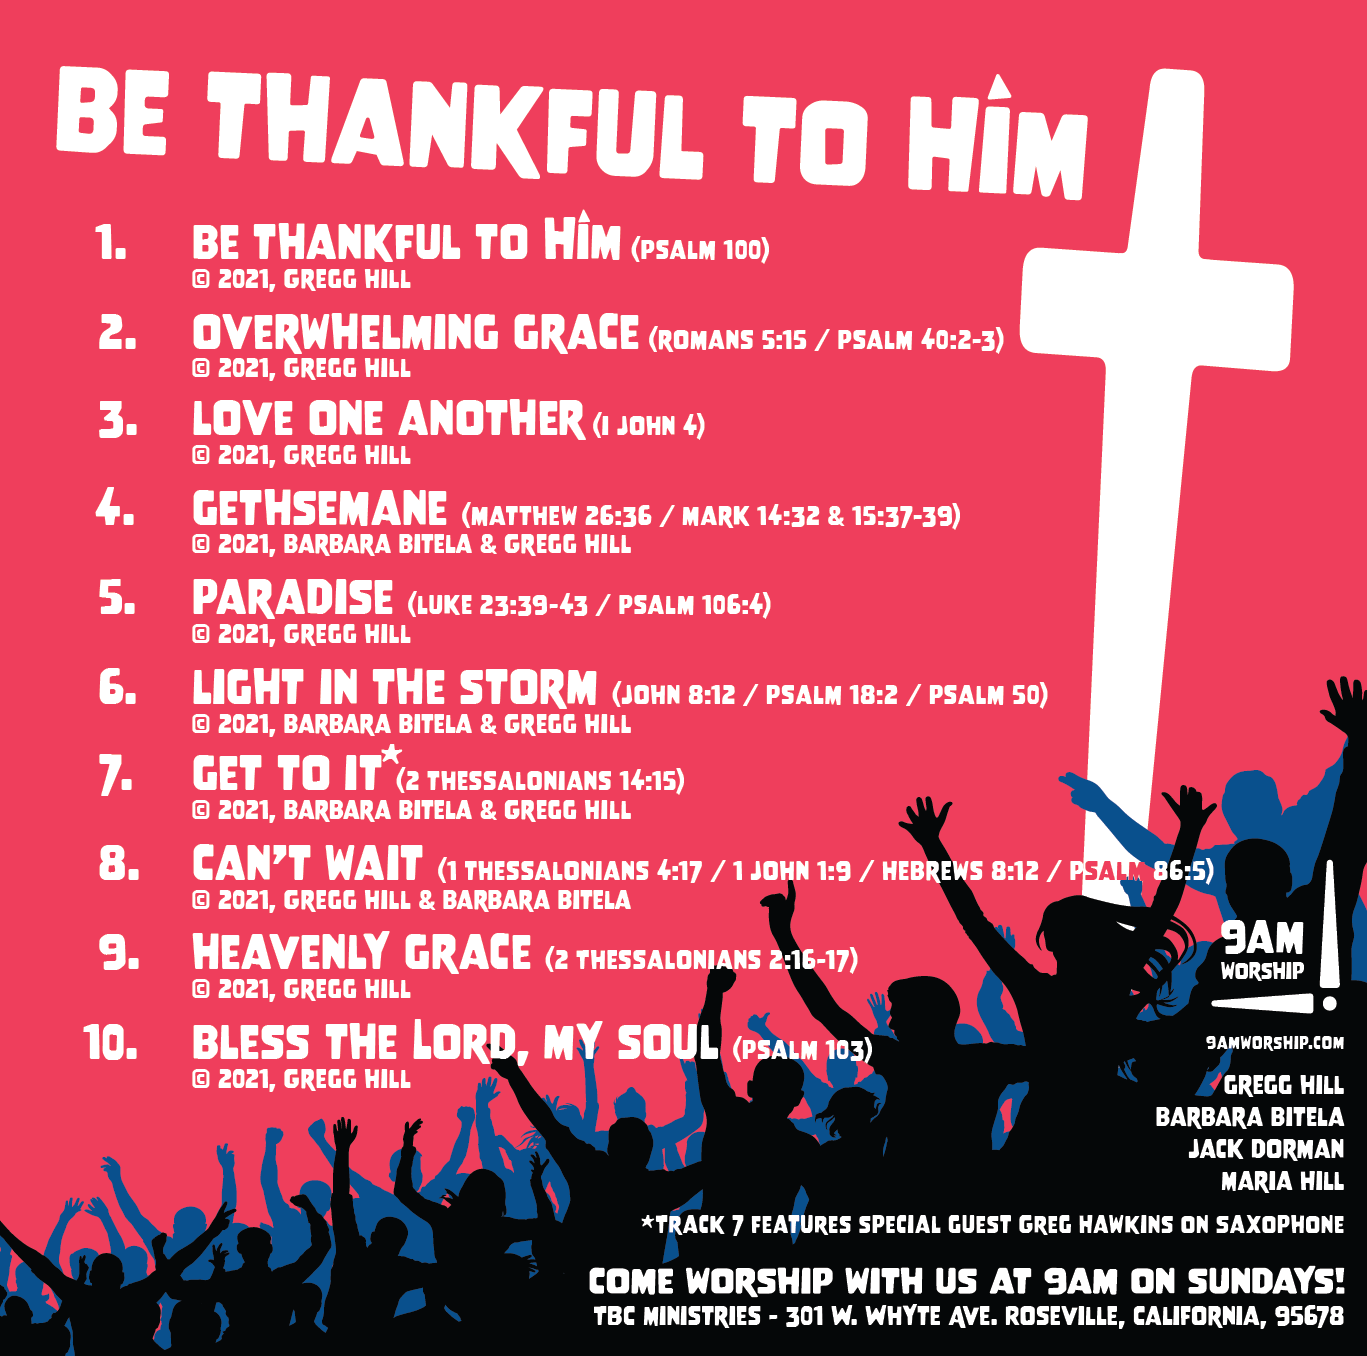 Album insert for "be thankful to Him" by 9am worship